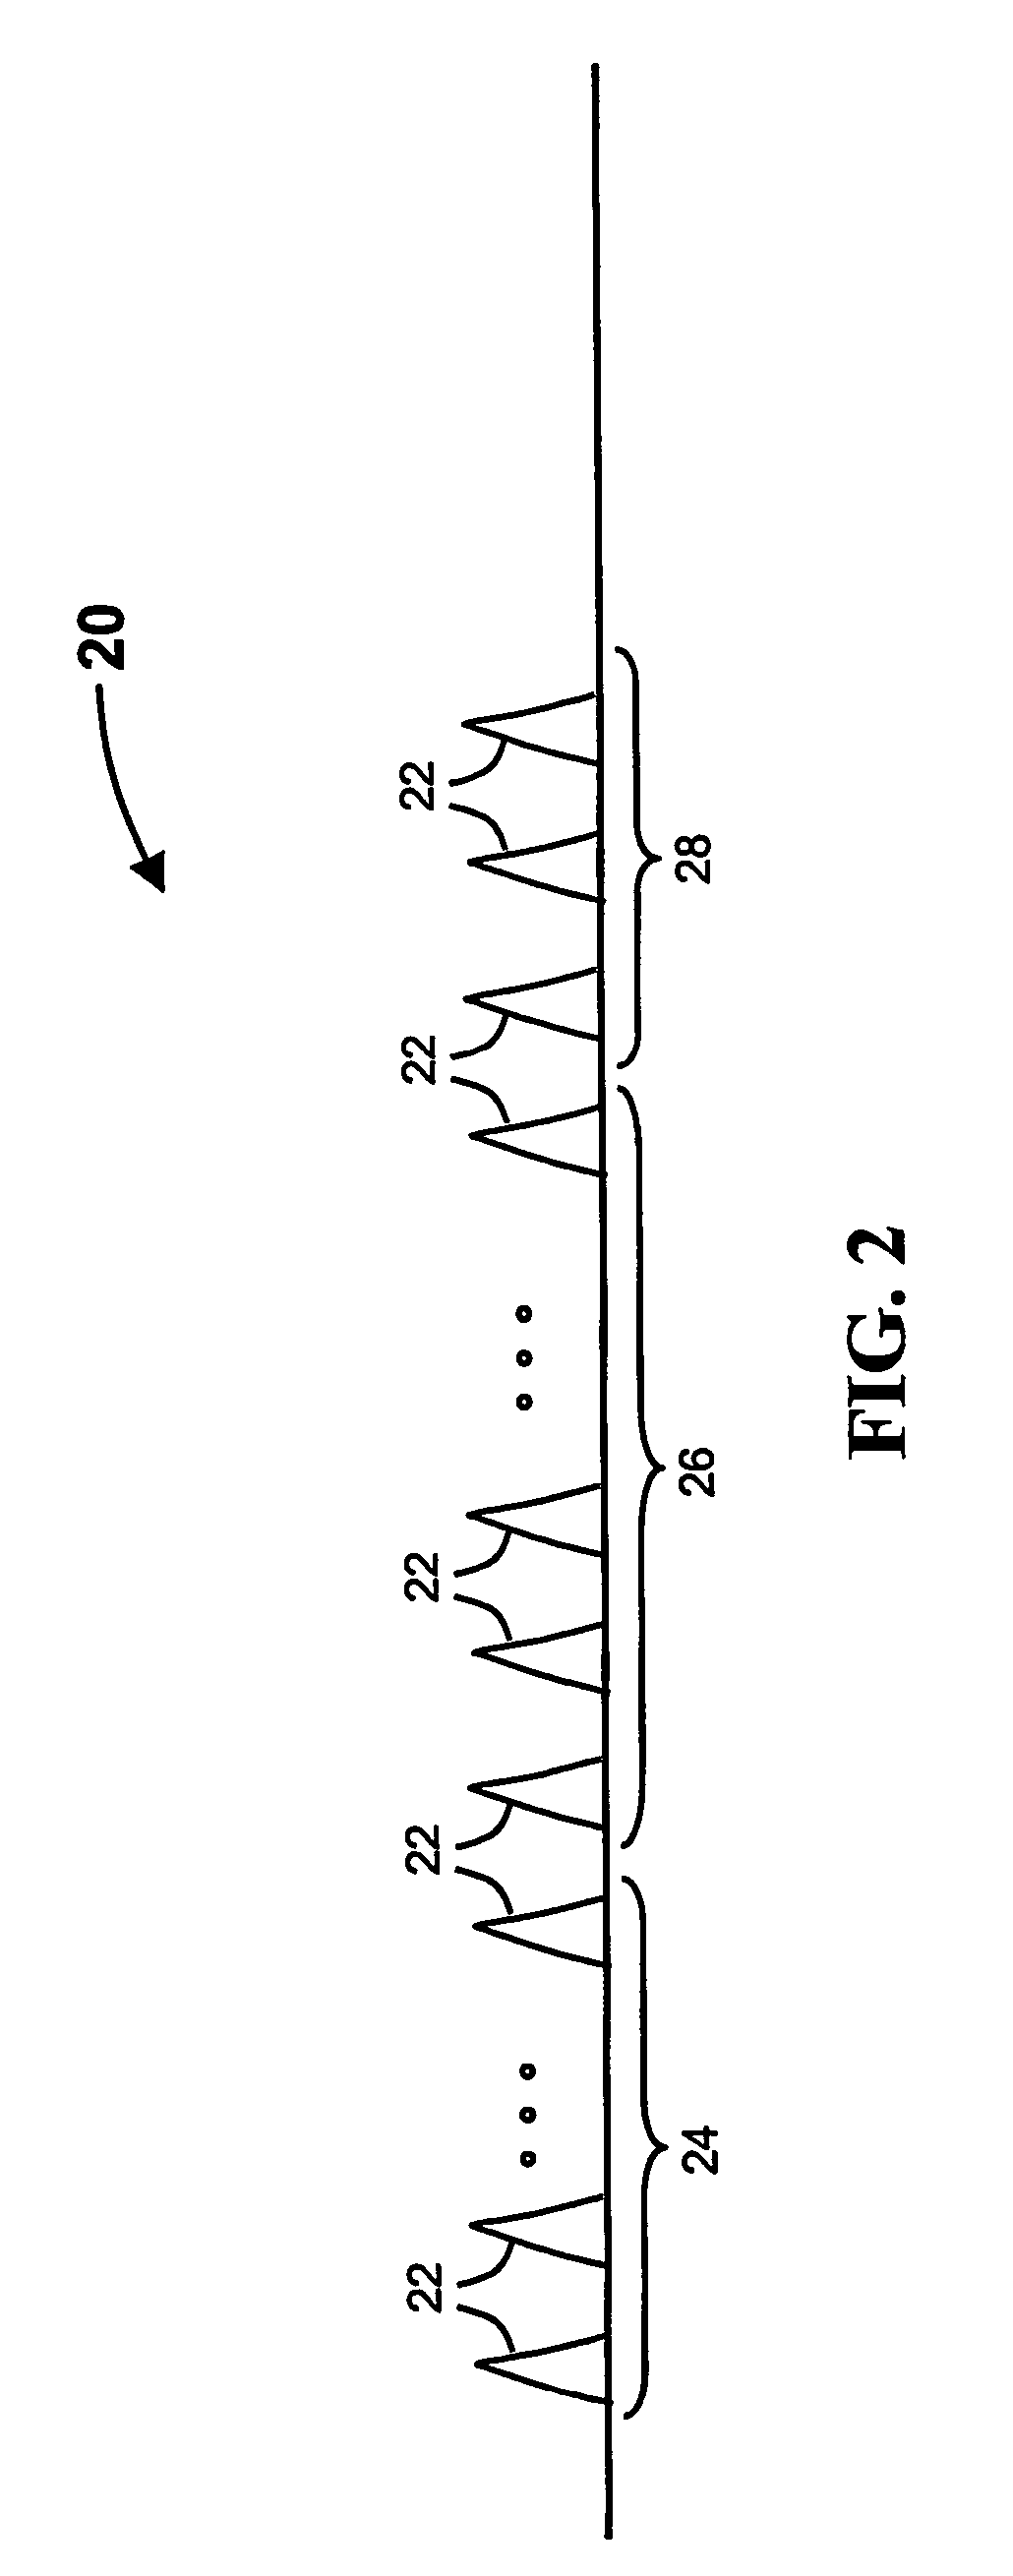 Method and system for distance determination of RF tags